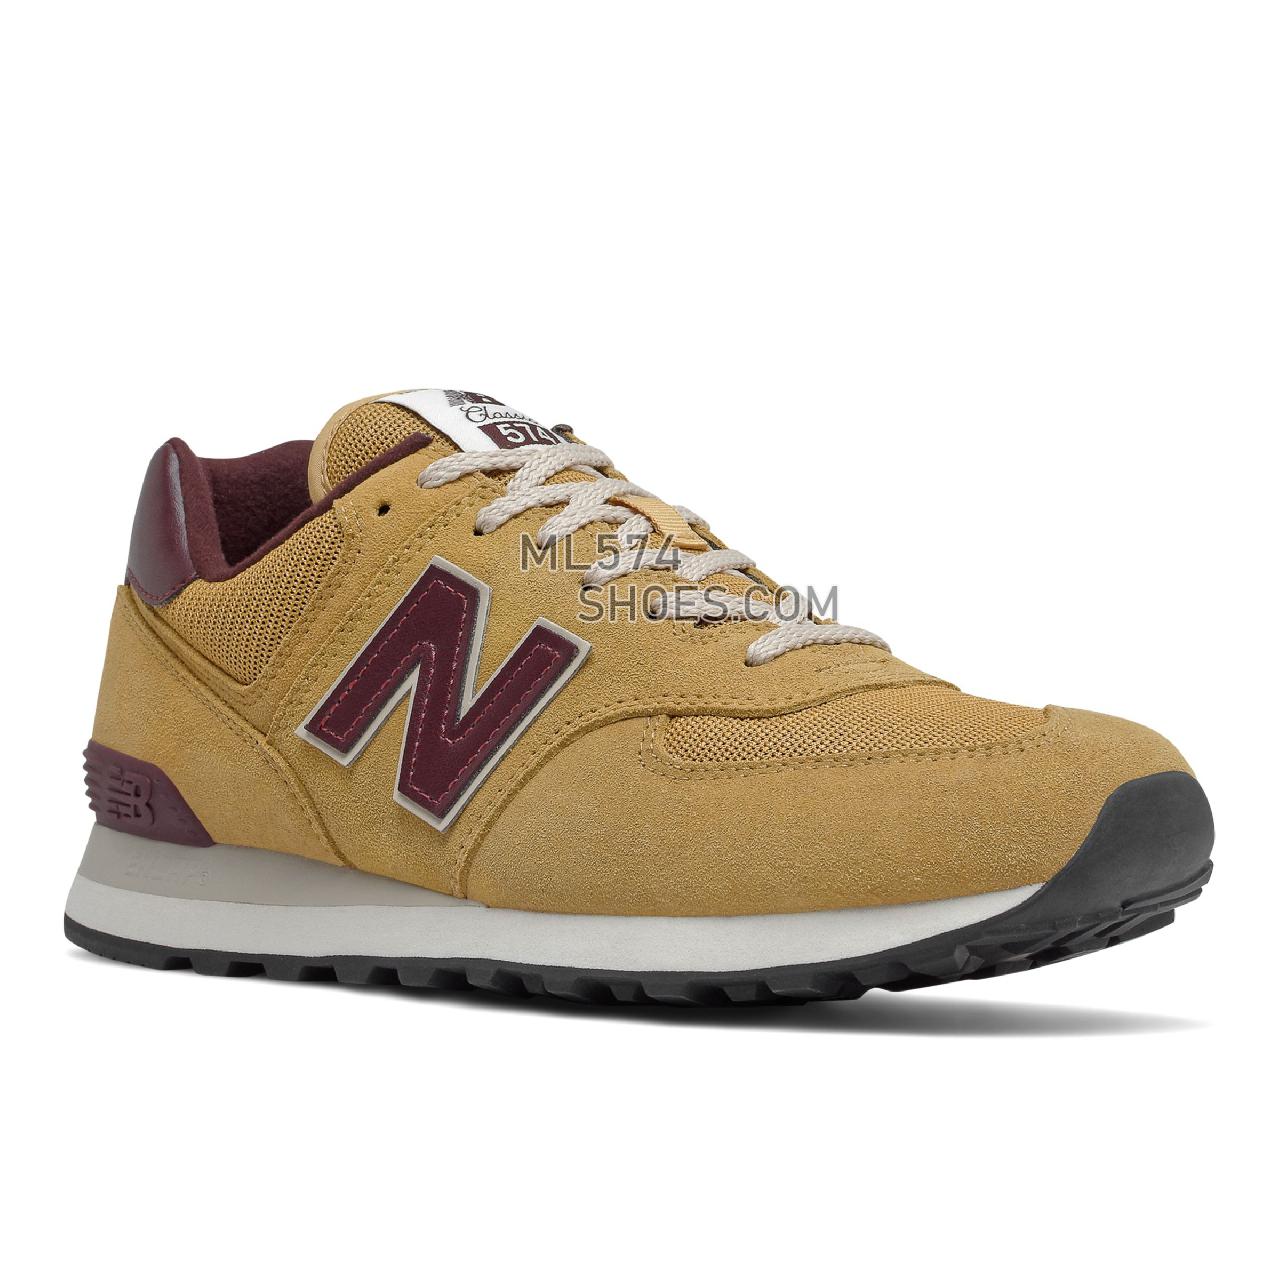 New Balance 574v2 - Unisex Men's Women's Classic Sneakers - Workwear with Henna - ML574BF2